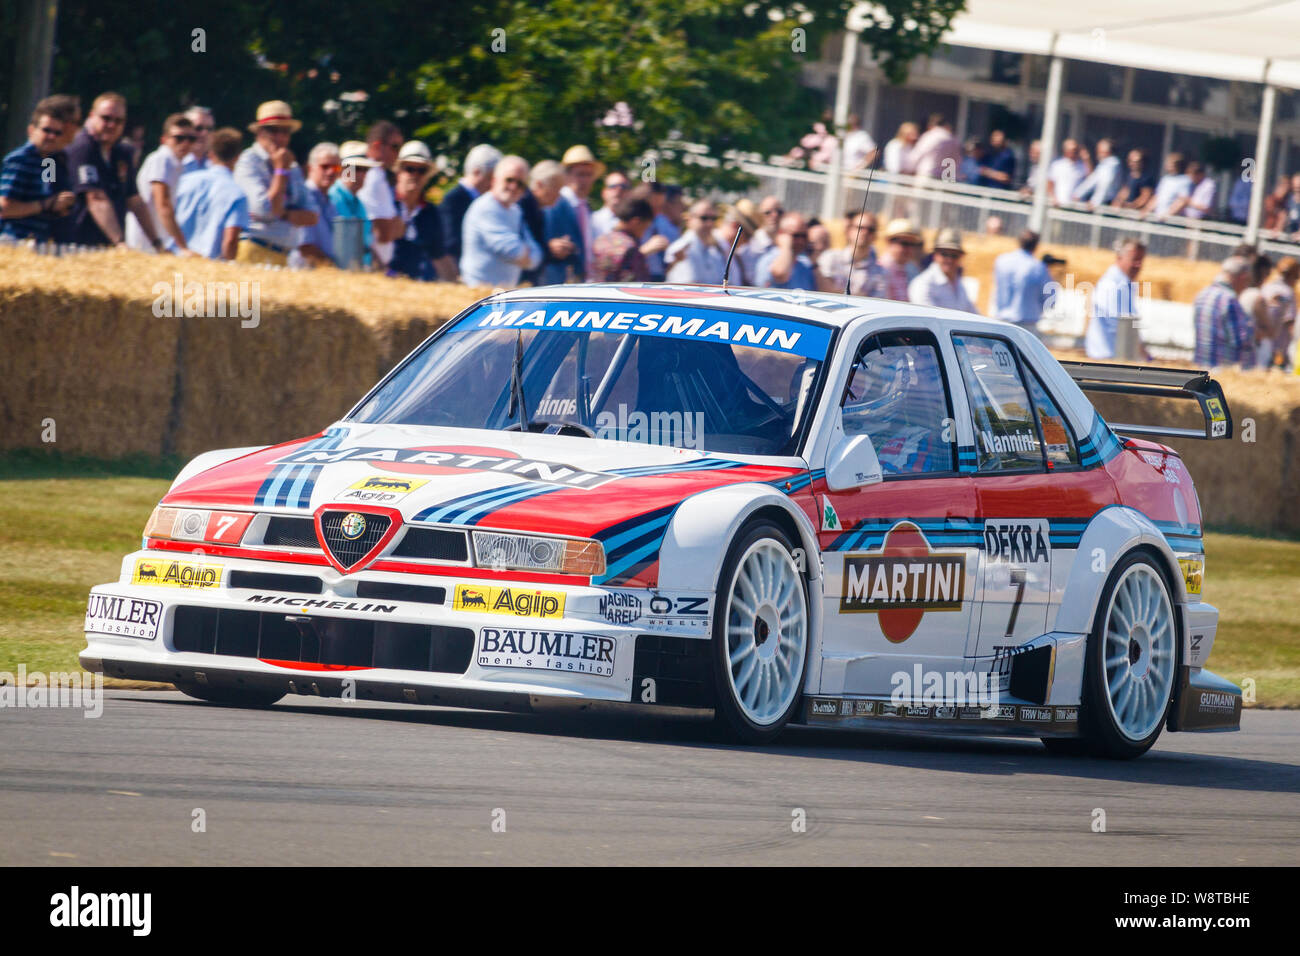 1995 Alfa Romeo 155 DTM with driver Jiri Jirovec at the 2019 Goodwood Festival of Speed, Sussex, UK. Martini livery. Stock Photo